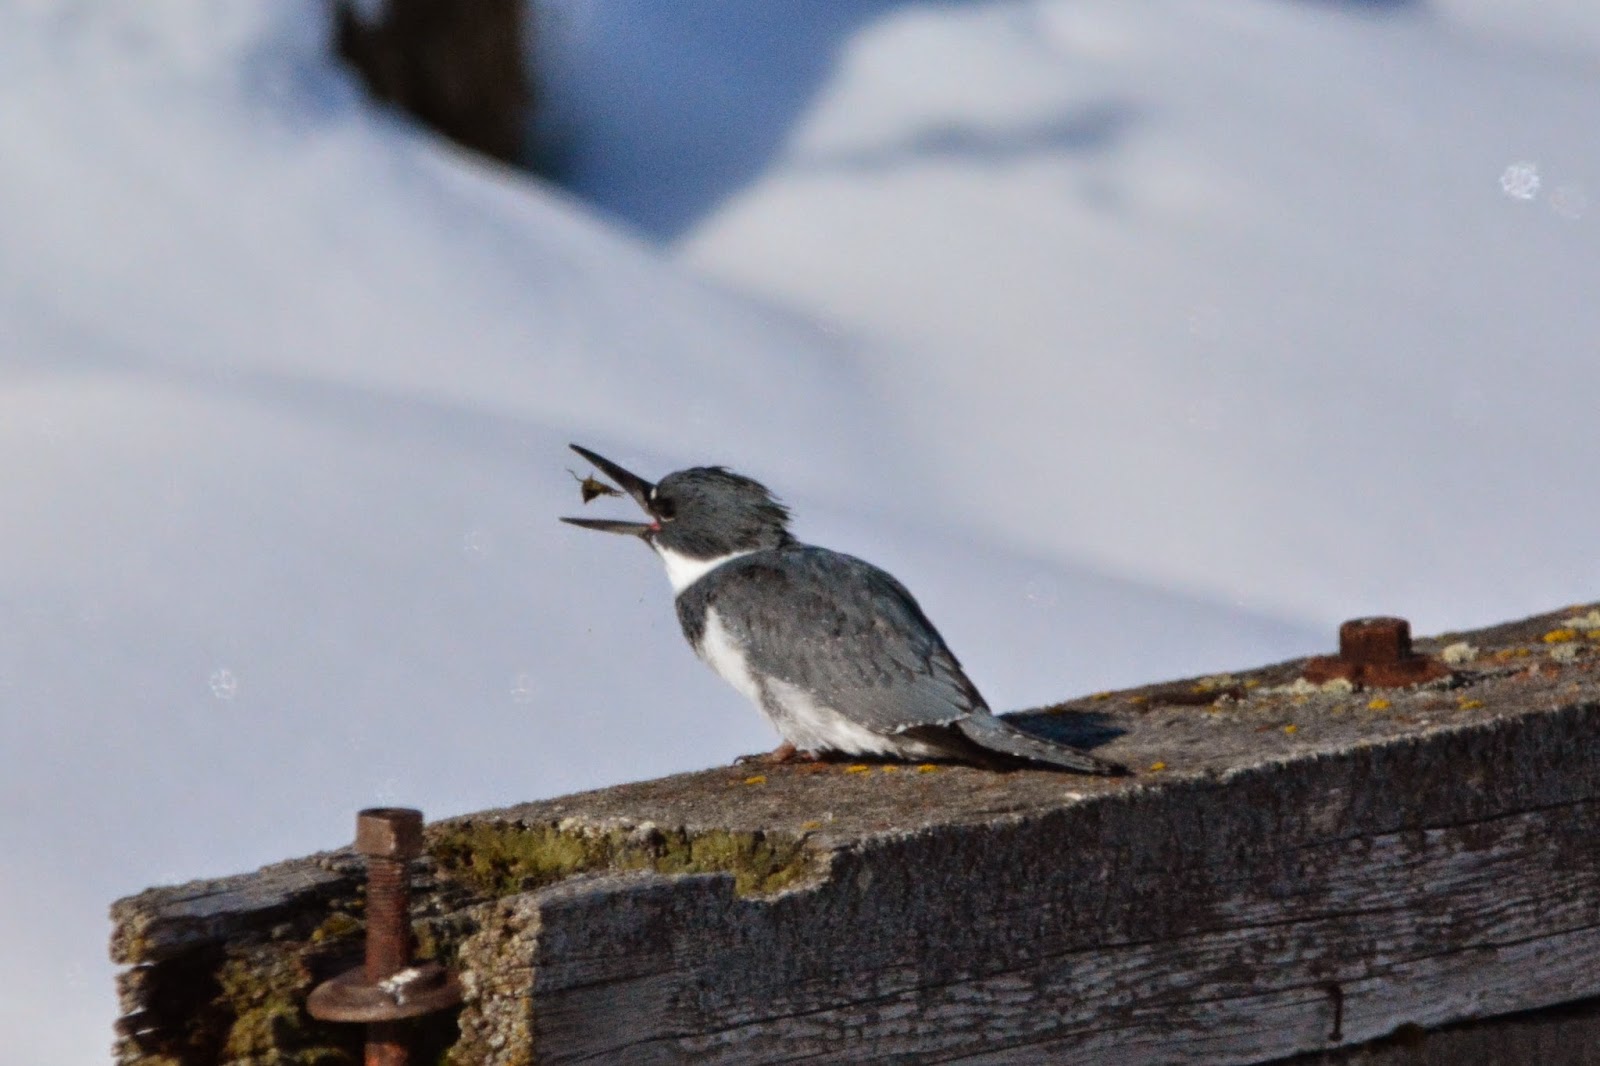 Bill Schiess&#39; Wild in Idaho - Experiences and Essays of Life: Belted Kingfisher in action